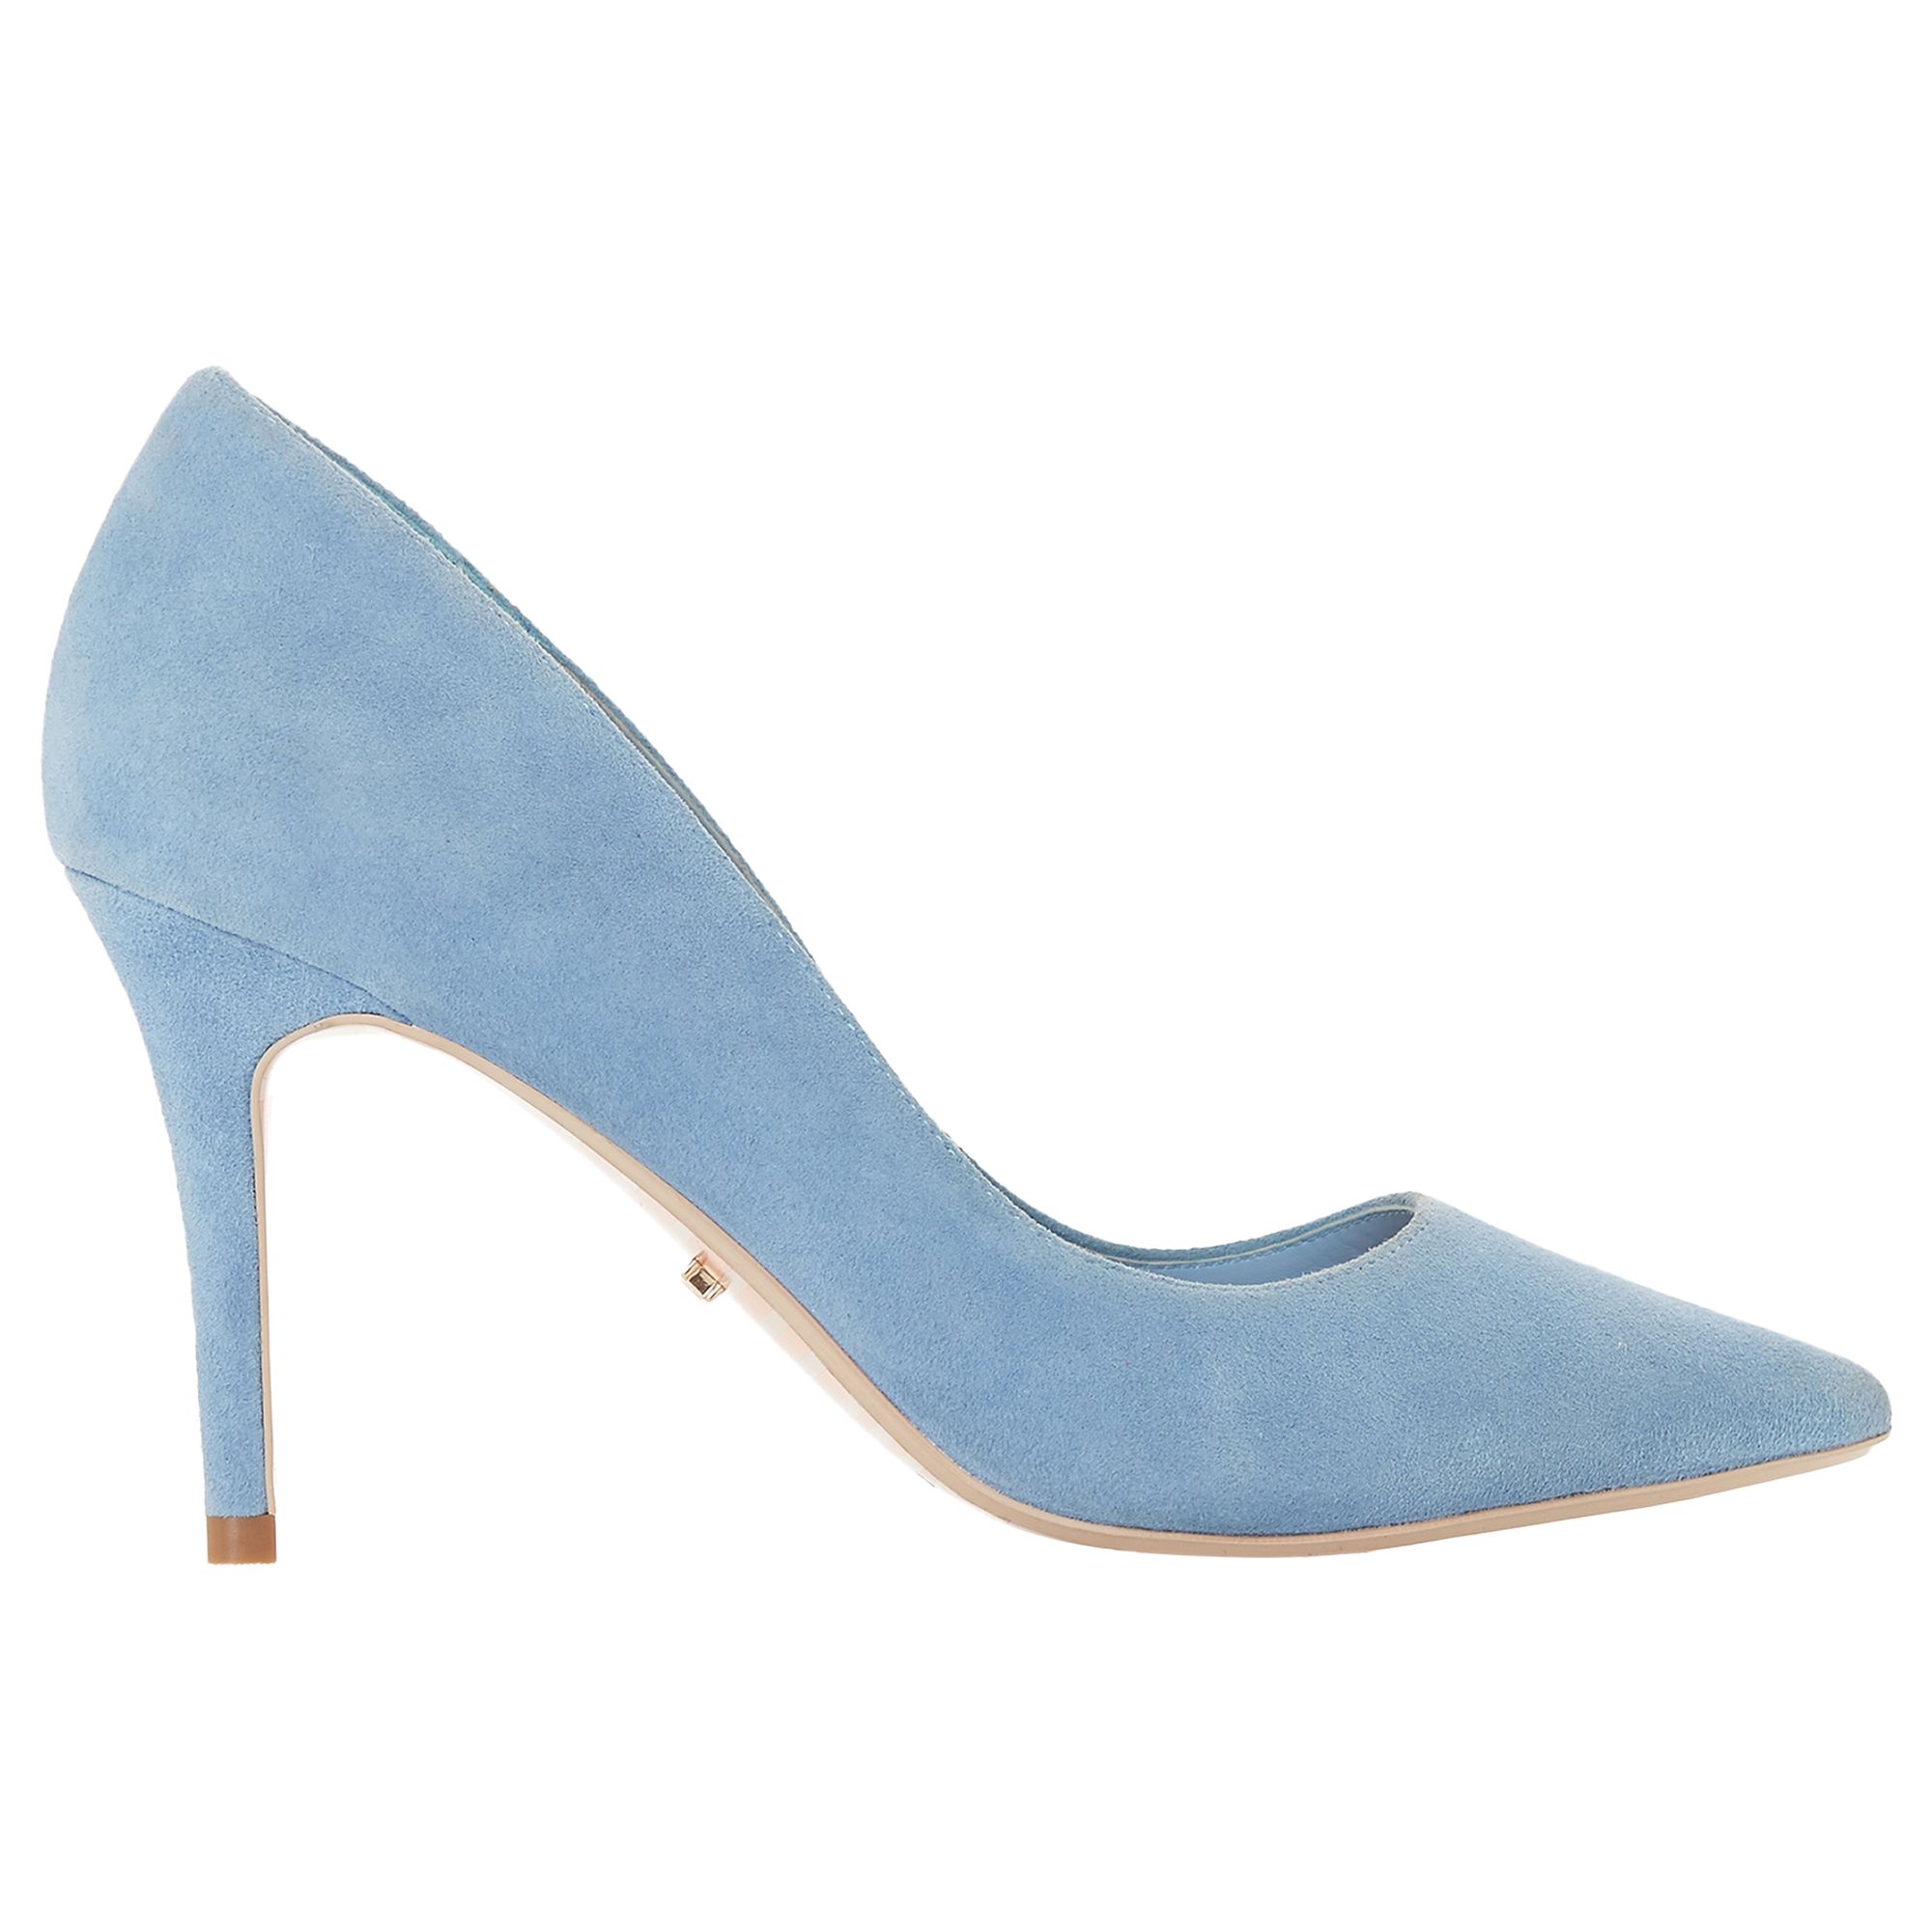 Dune Aurrora Pointed Toe Court Shoes, Blue Suede, 6